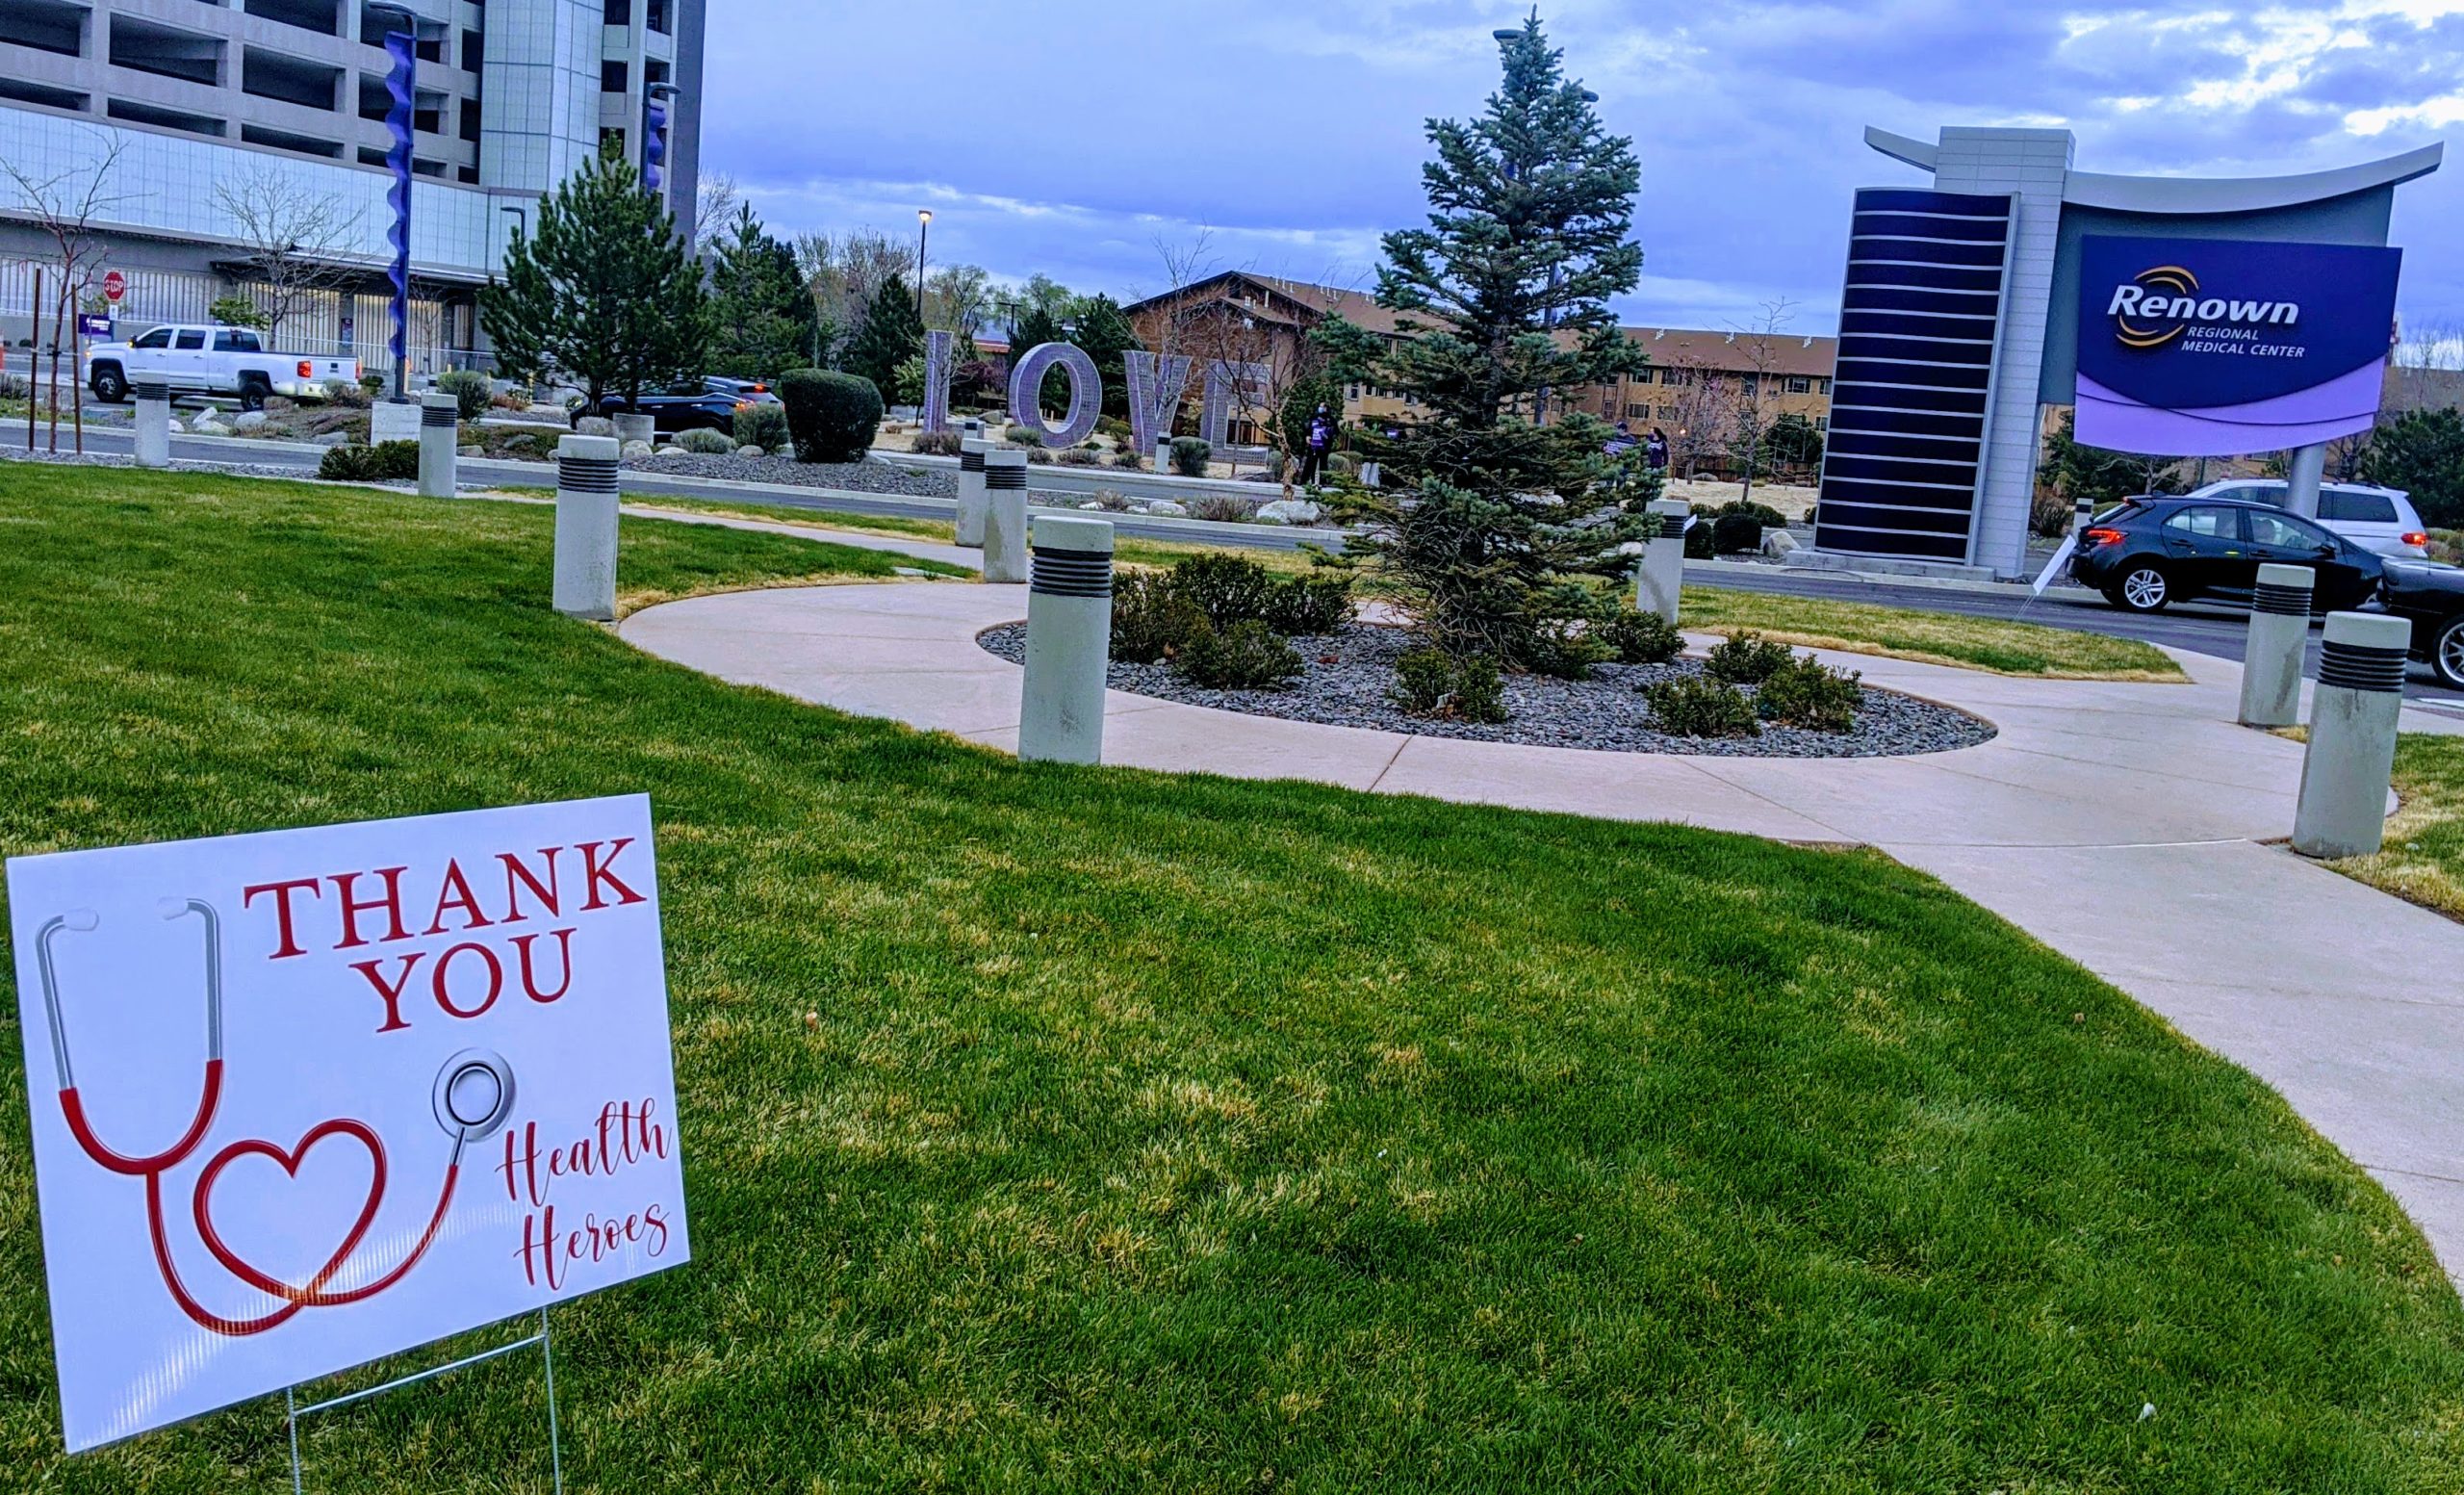 Sign saying "Thank you, health heroes," outside Renown Hospital.